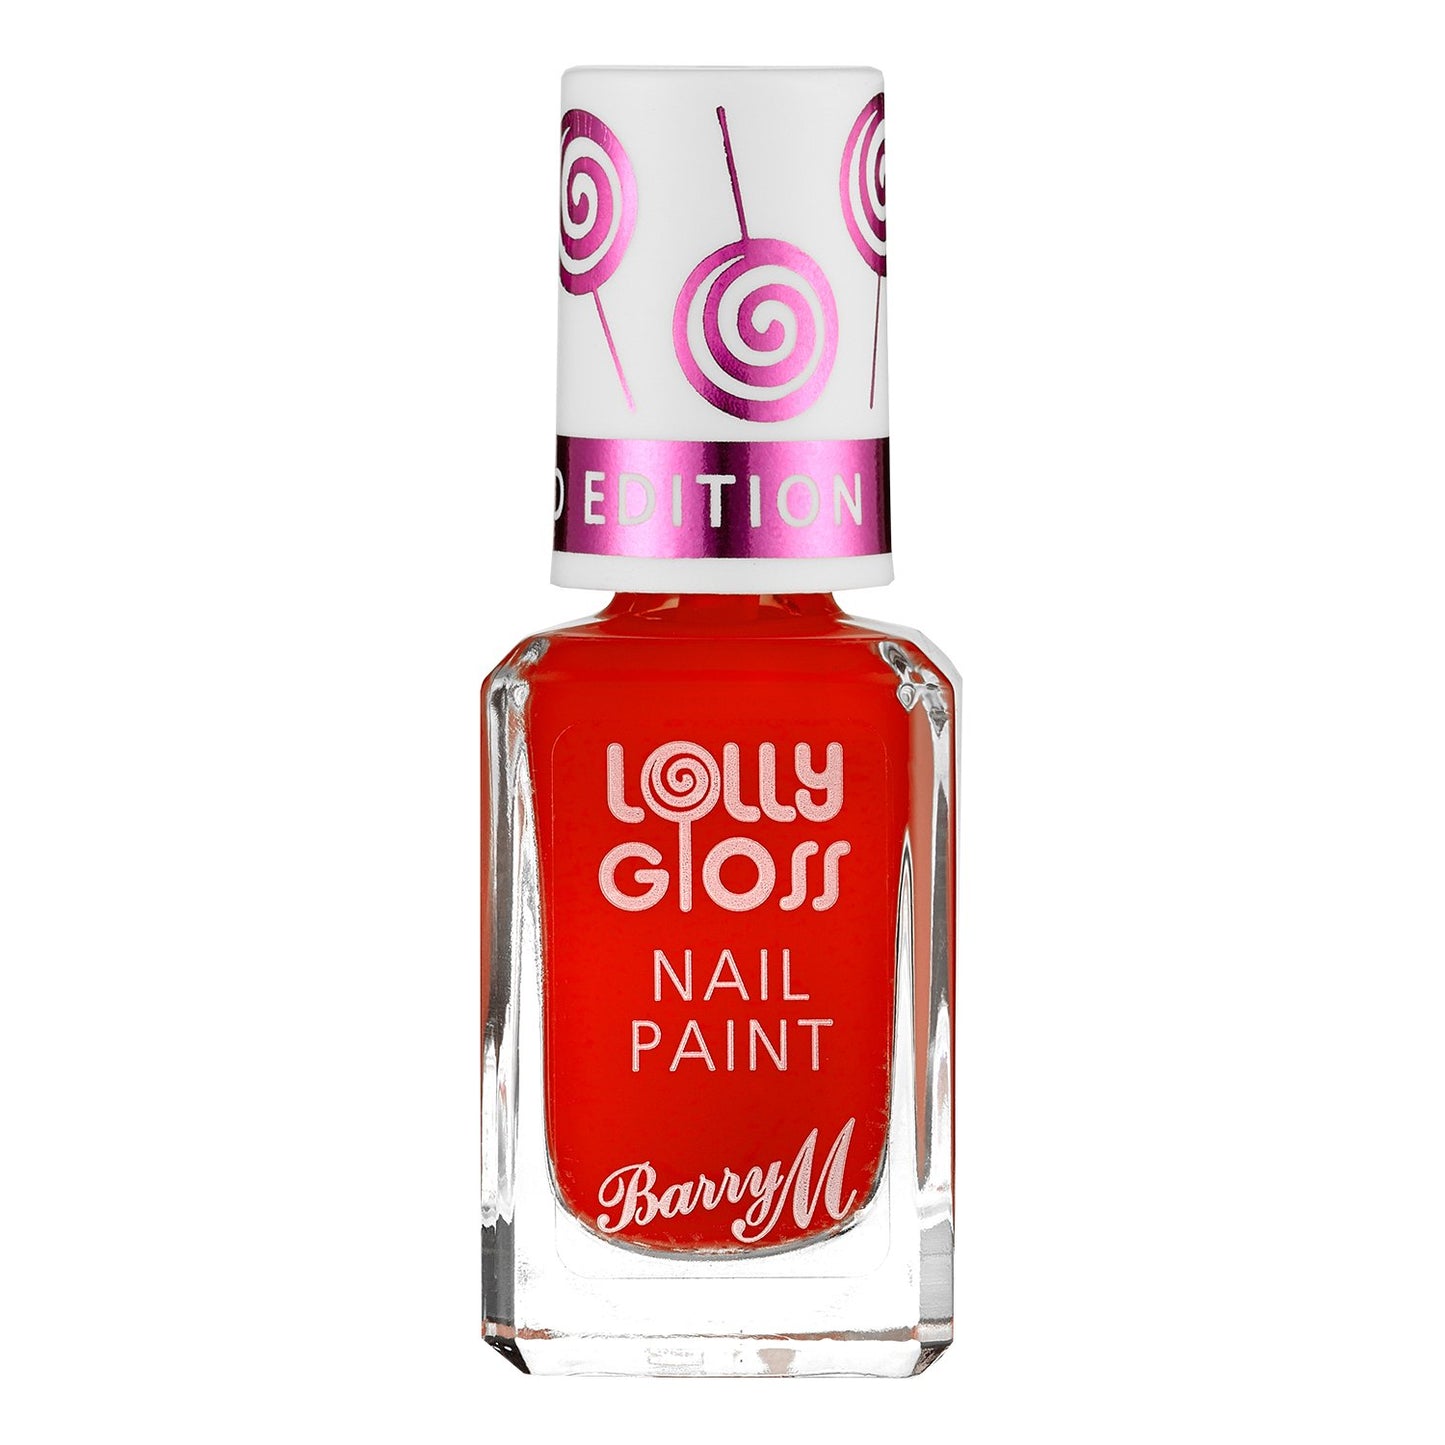 Barry M Limited Edition Lolly Gloss Nail Paint Orange Fizz